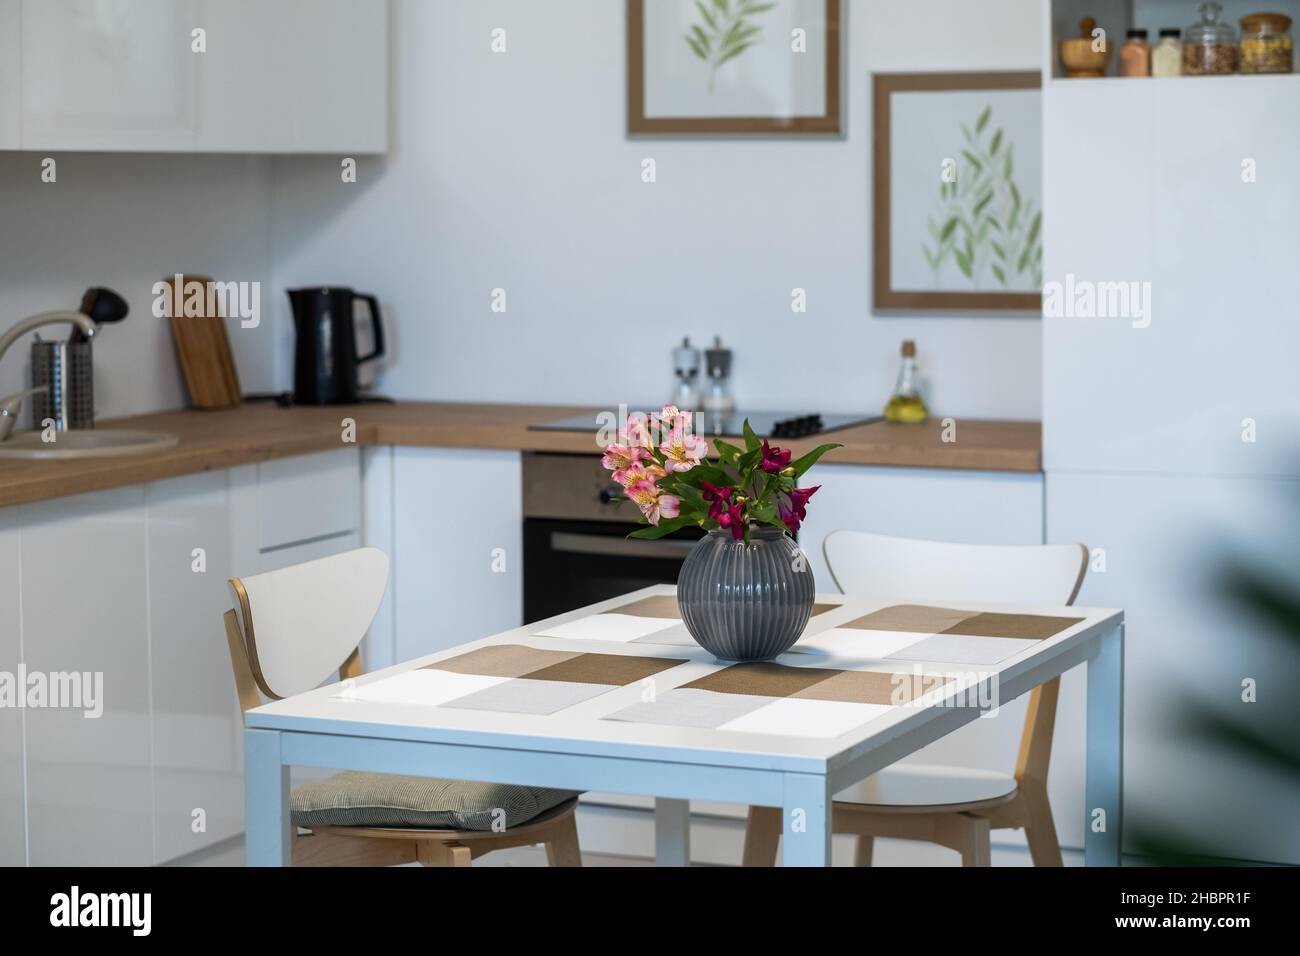 Image of beautiful flowers in vase on the kitchen table in empty domestic kitchen Stock Photo